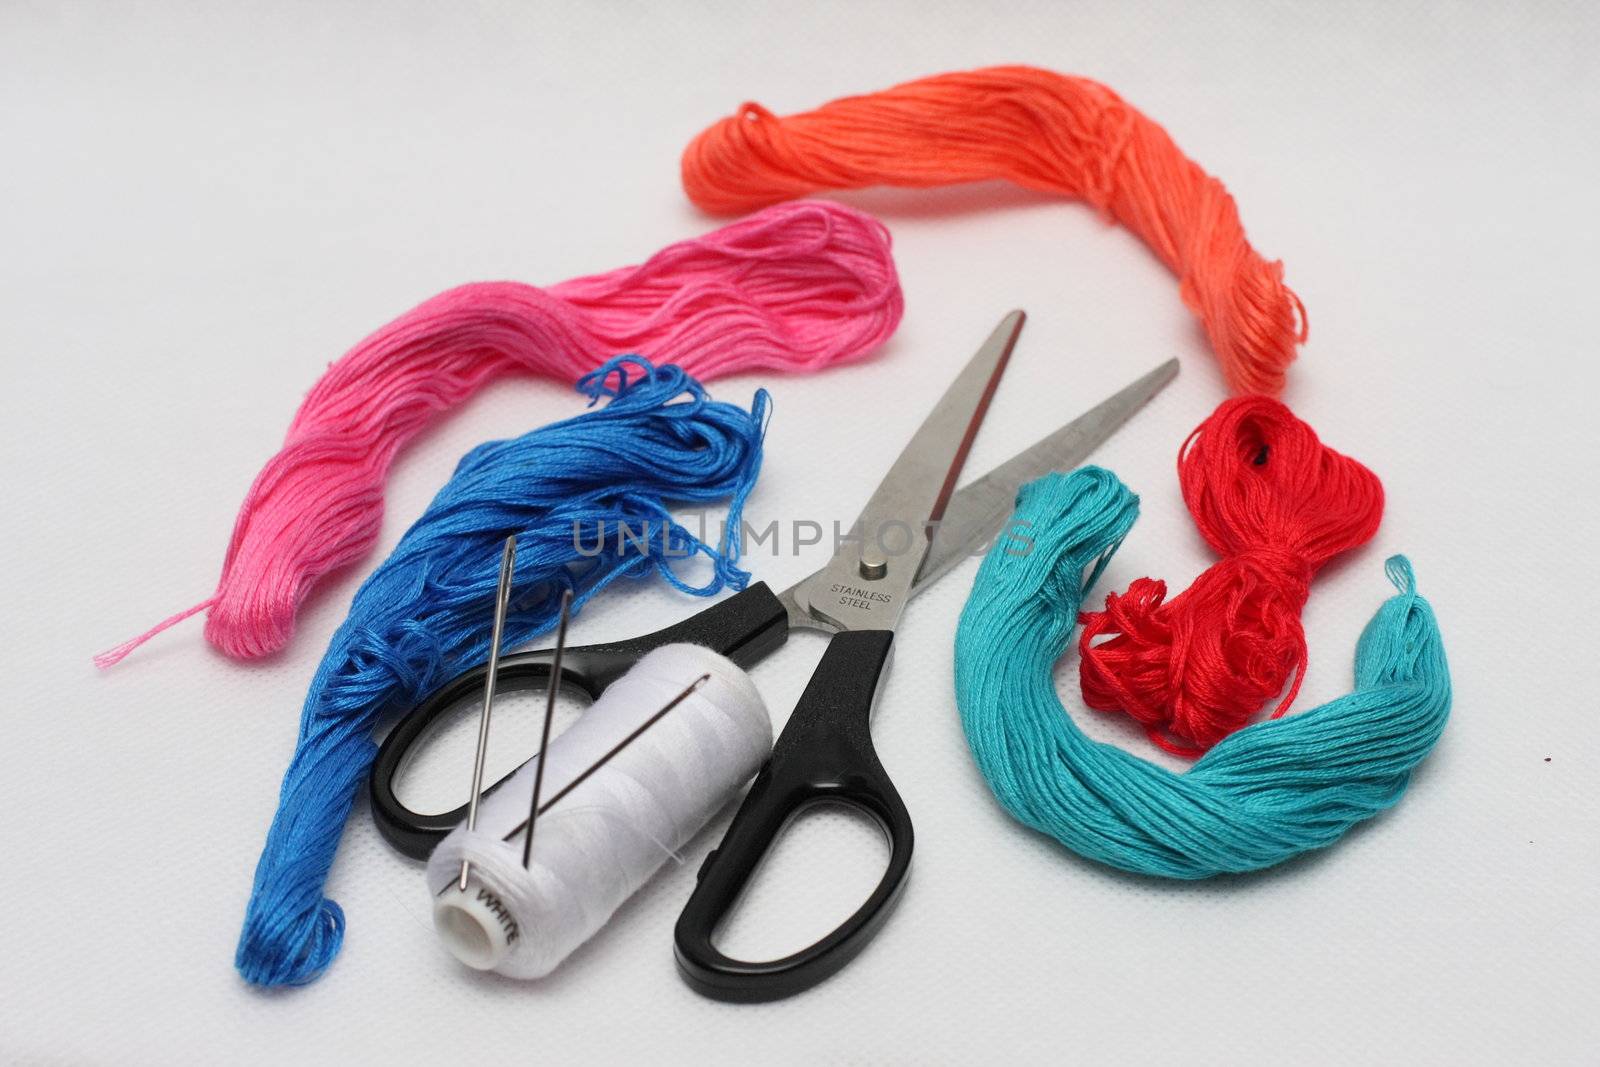 embroidery, set, threads, scissors, a, needle, the, coil, red, dark, blue, pink, white, manufacture, art, Concept, Creativity.
